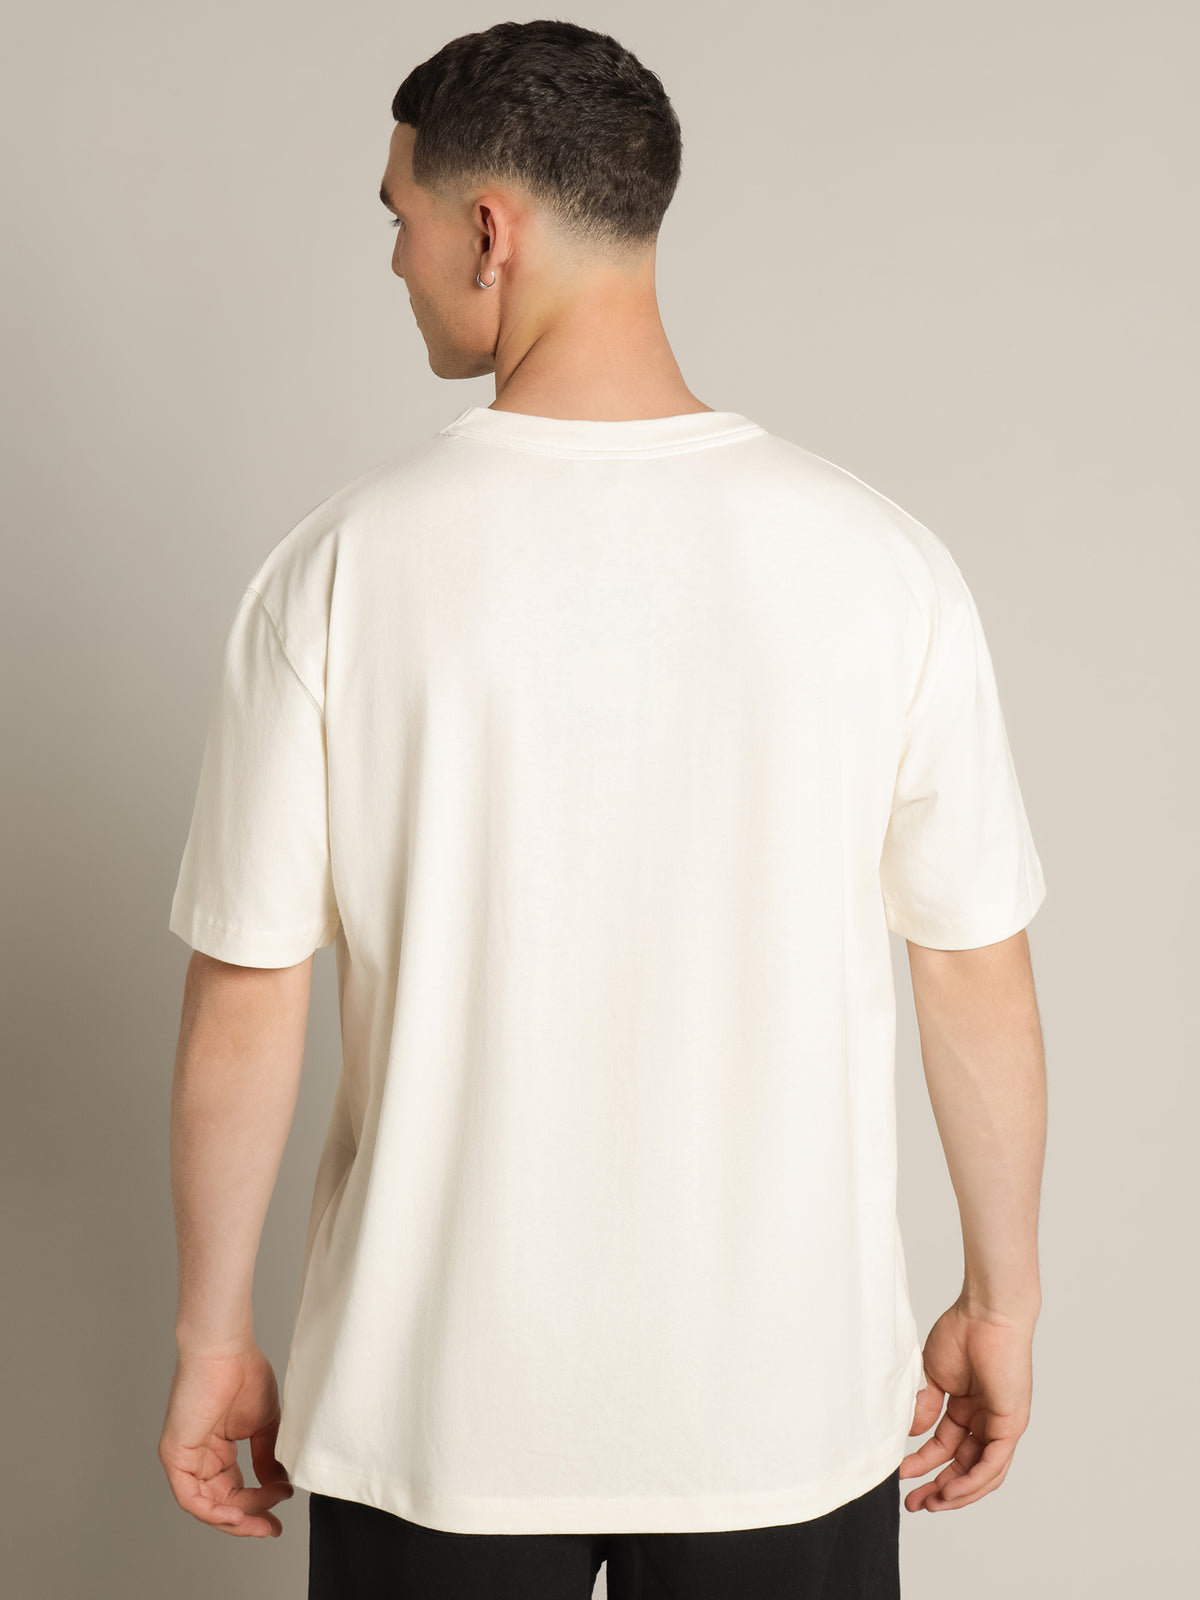 Archive Heritage T-Shirt in Chalk White